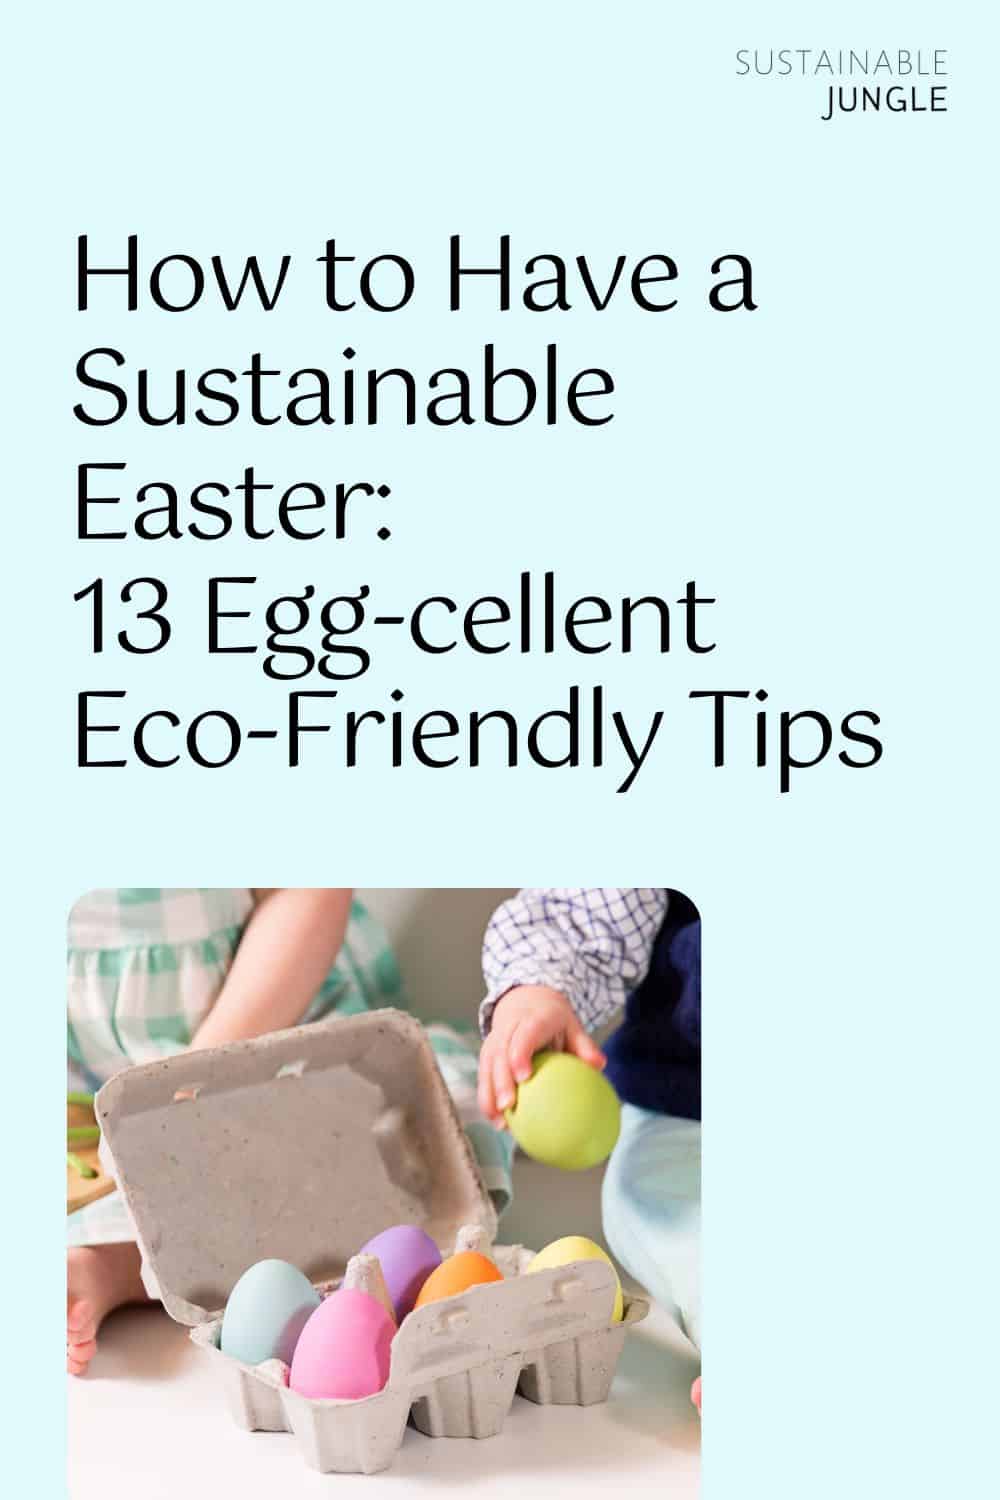 How to Have a Sustainable Easter: 13 Egg-cellent Eco-Friendly Tips Image by Red Barn Toys #sustainablejungle #sustainableeasterbasktetideas #sustainableeastereggs #ecofriendlyeaster #ecofriendlyeasterbaskets #ecofriendlyfillableeastereggs #sustainablejungle